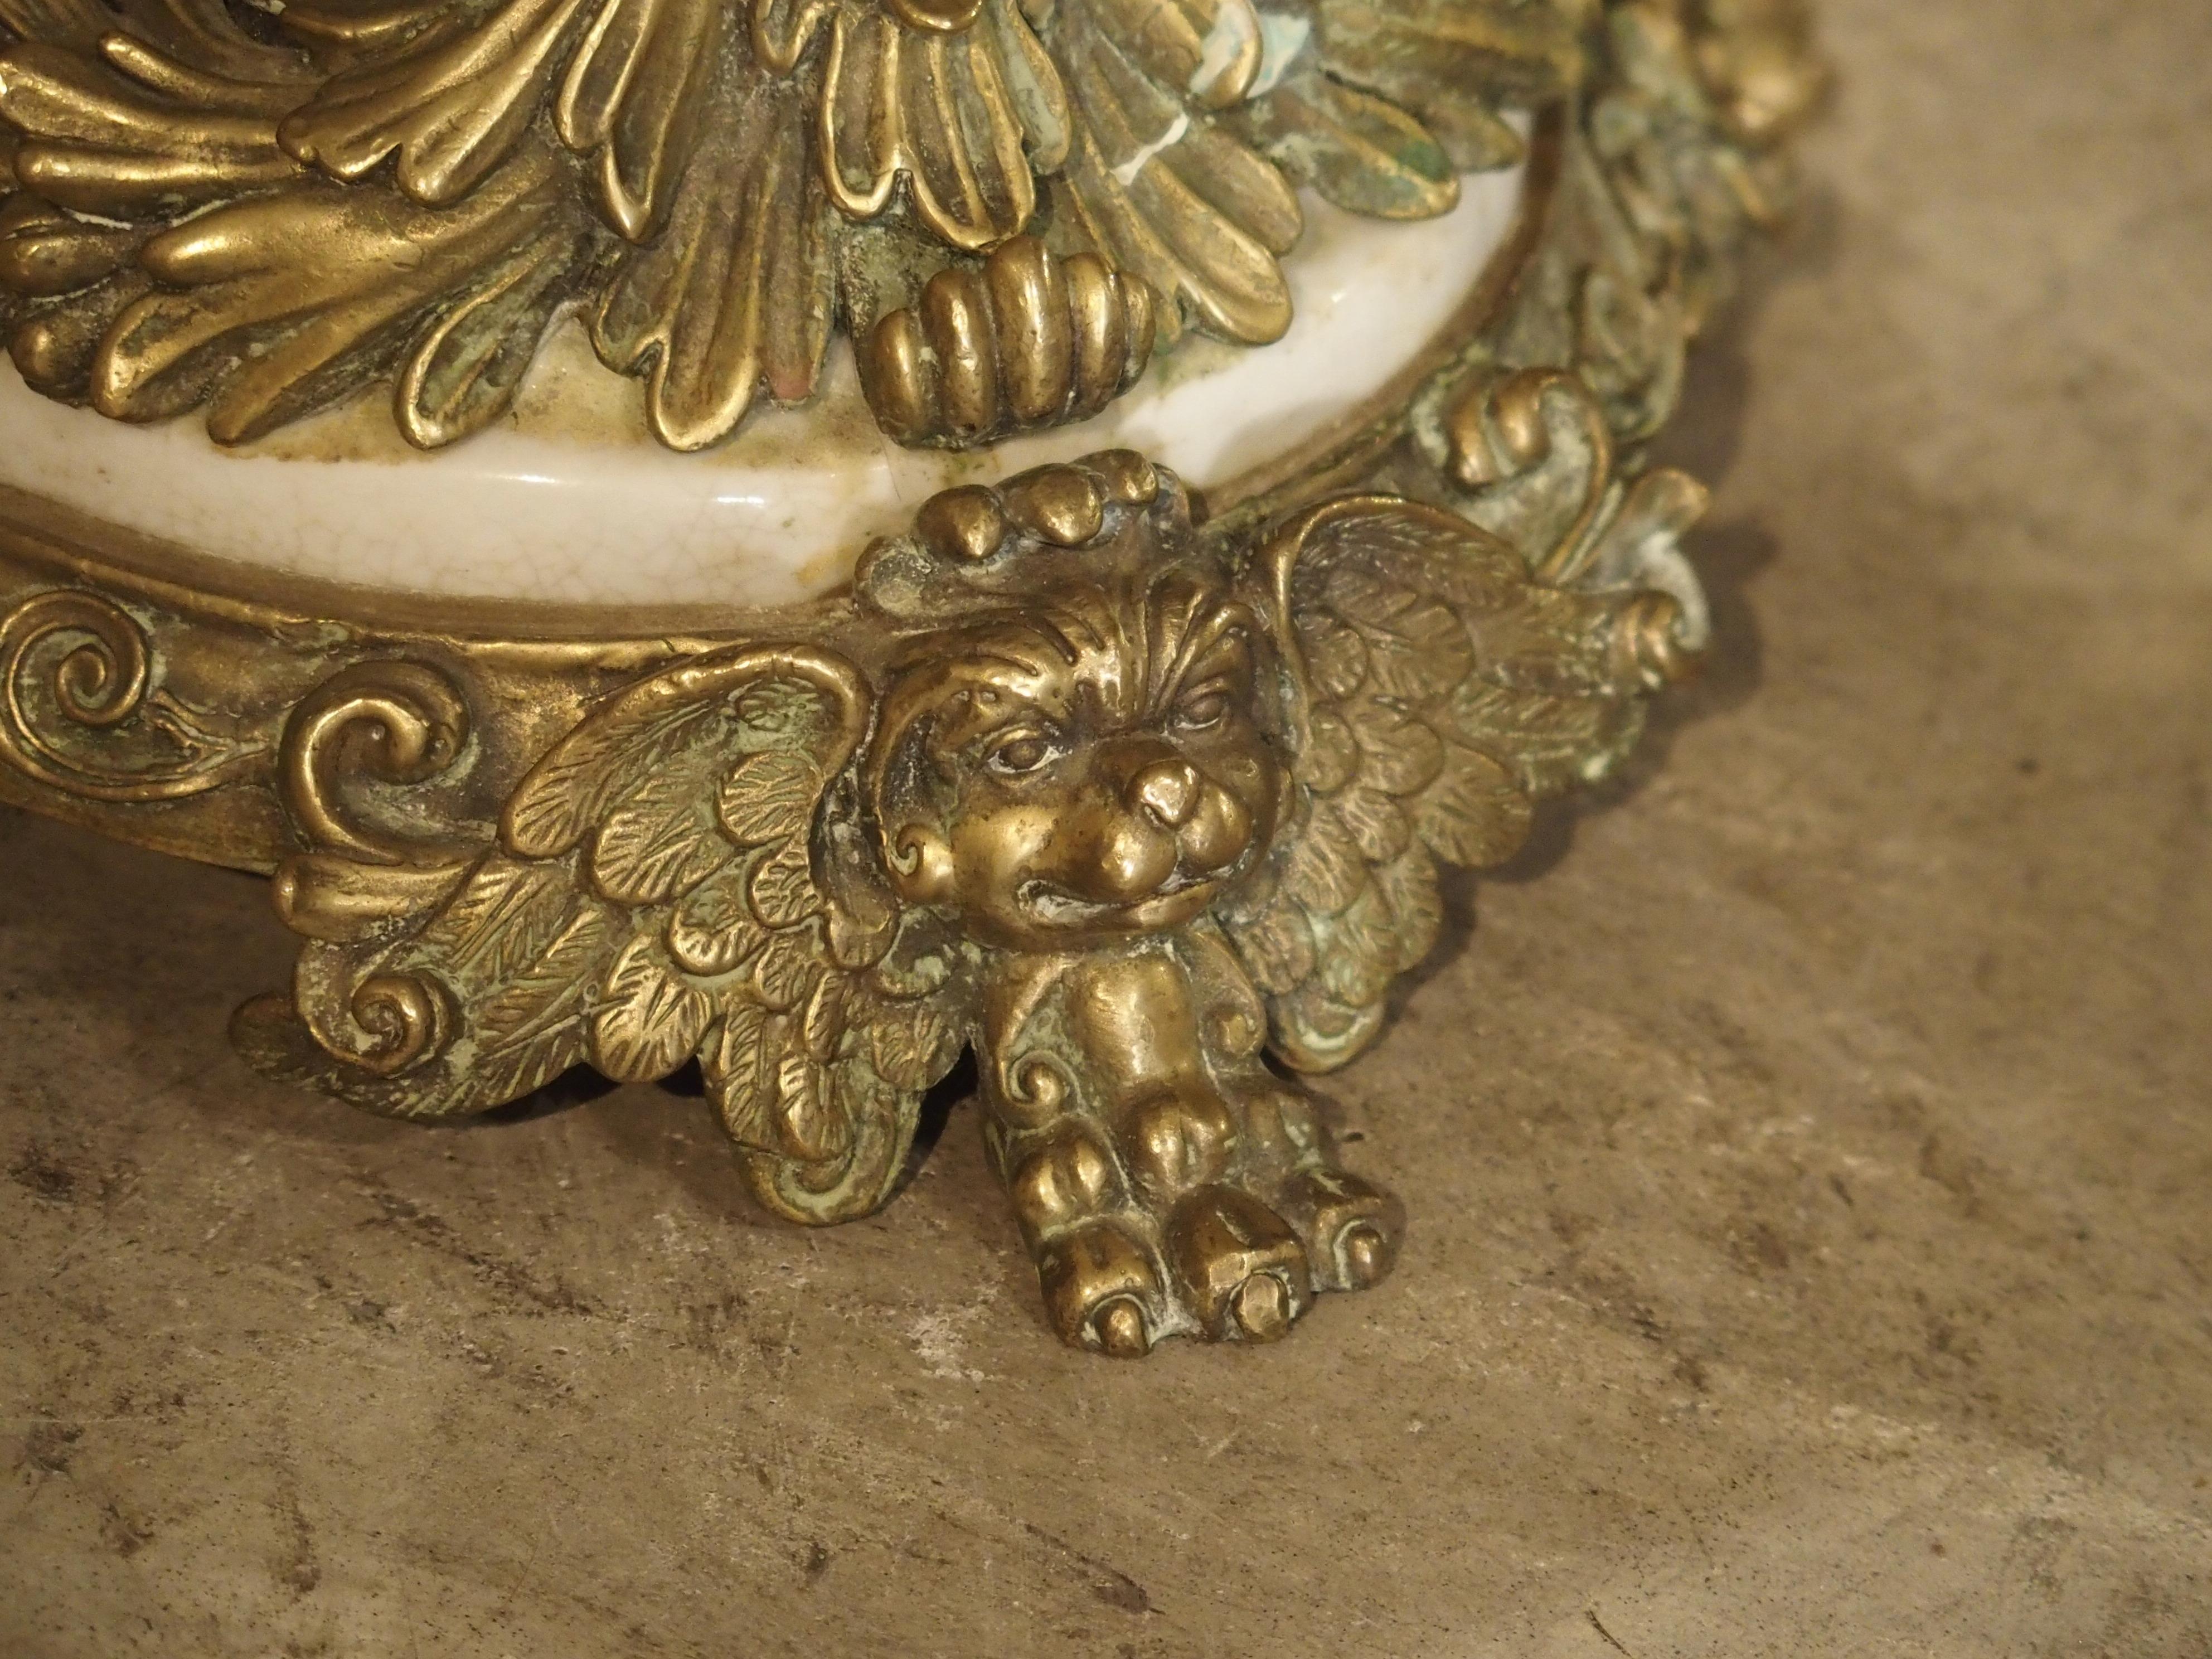 Early 20th Century White Faience Urn with Gilt Bronze-Mounted Horses from France, circa 1900